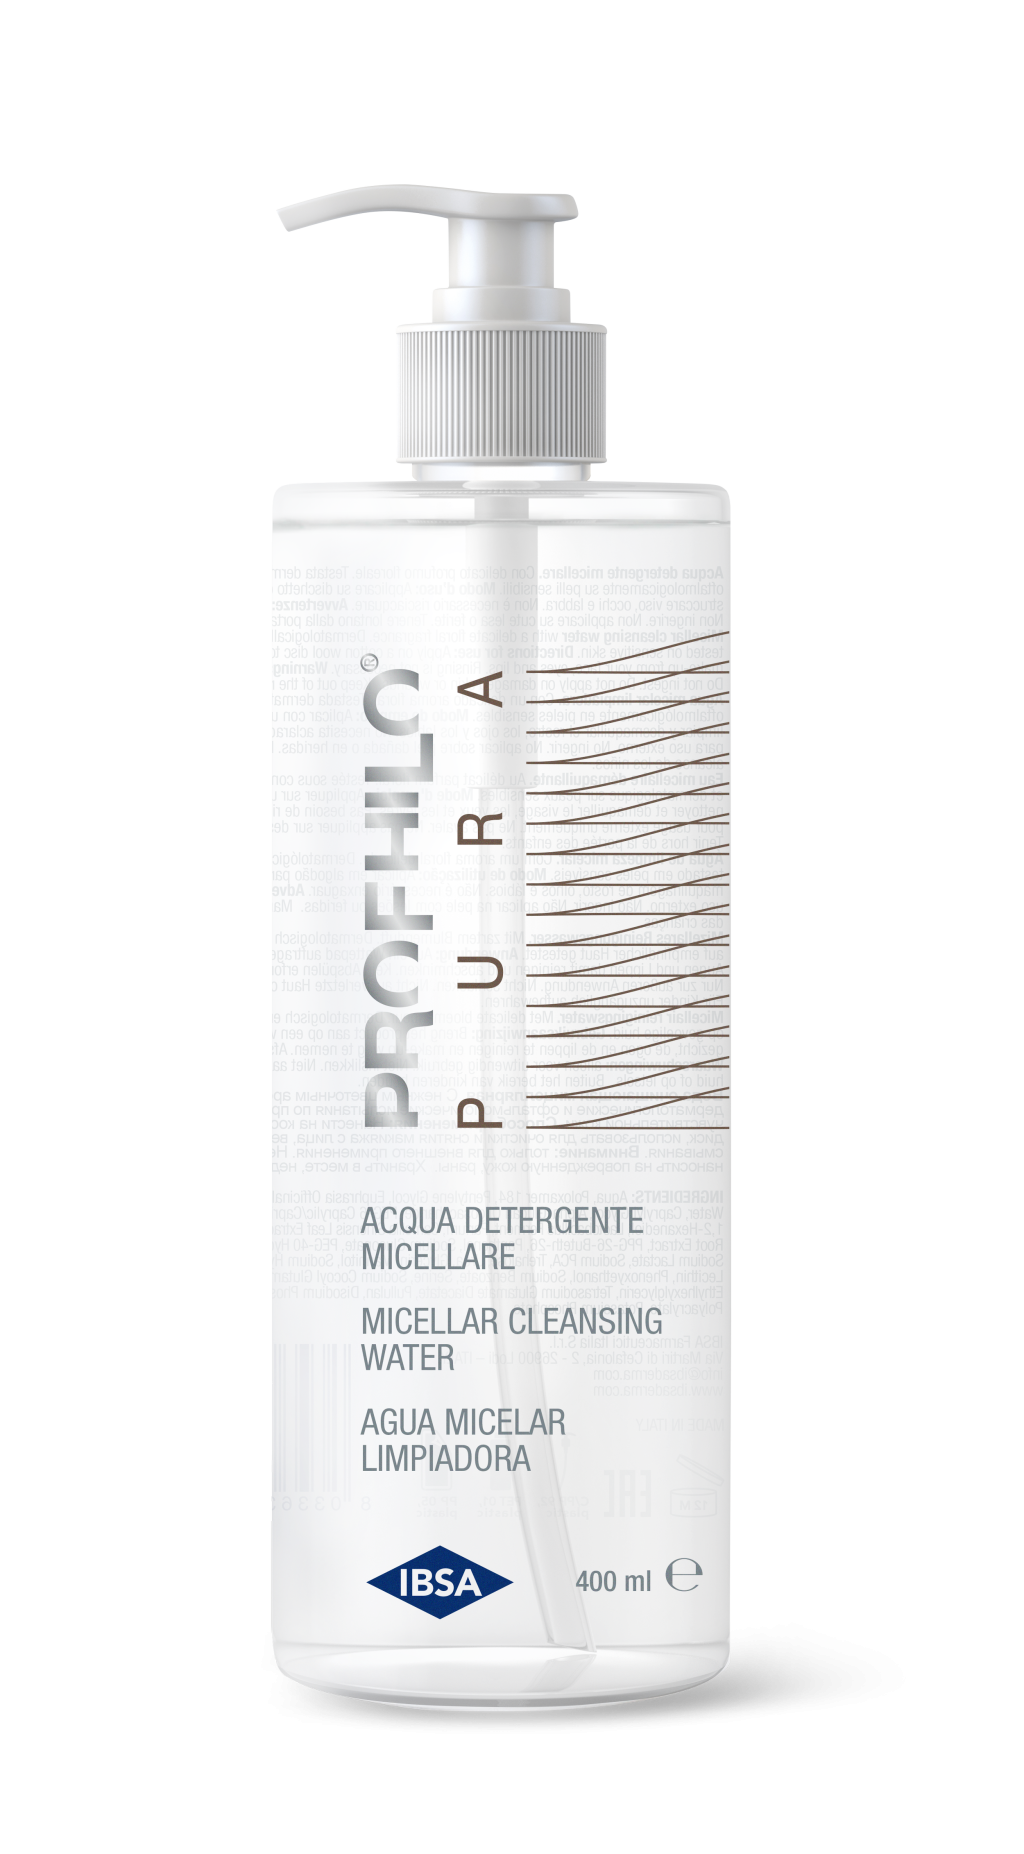 PROFHILO PURA MICELLAR CLEANSING WATER 